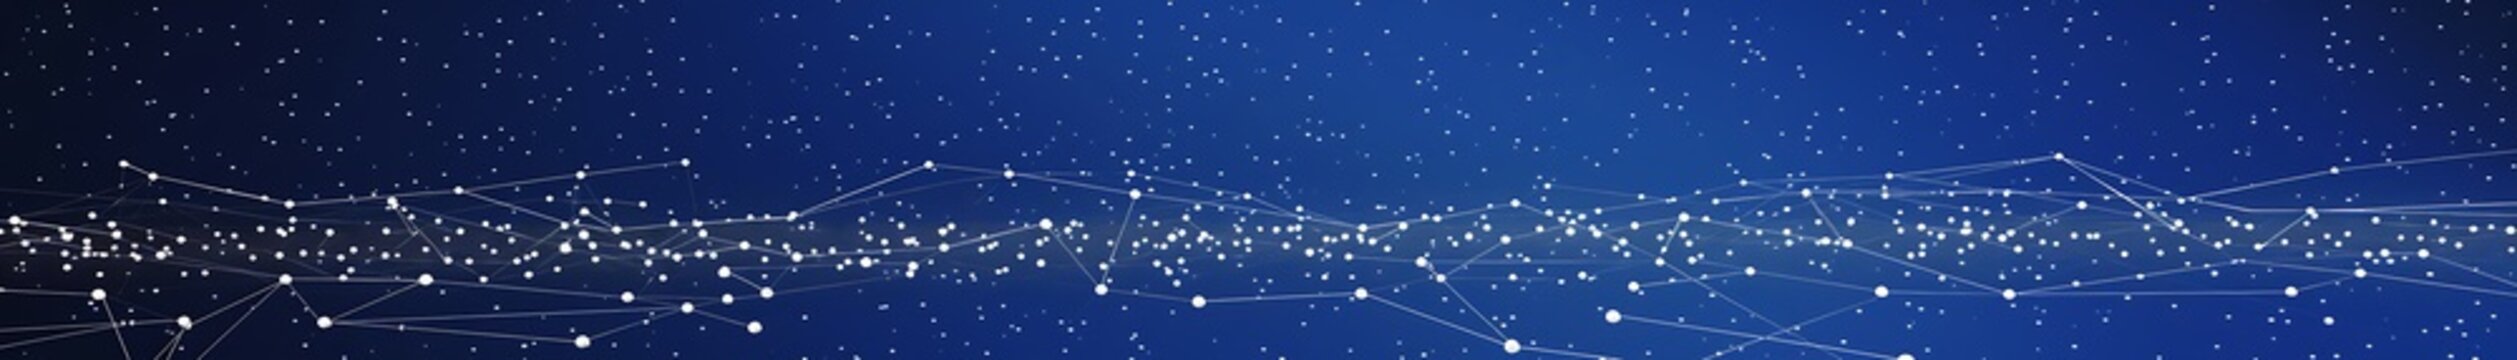 A constellation-like arrangement of white dots connected with silver lines against a deep blue celestial background